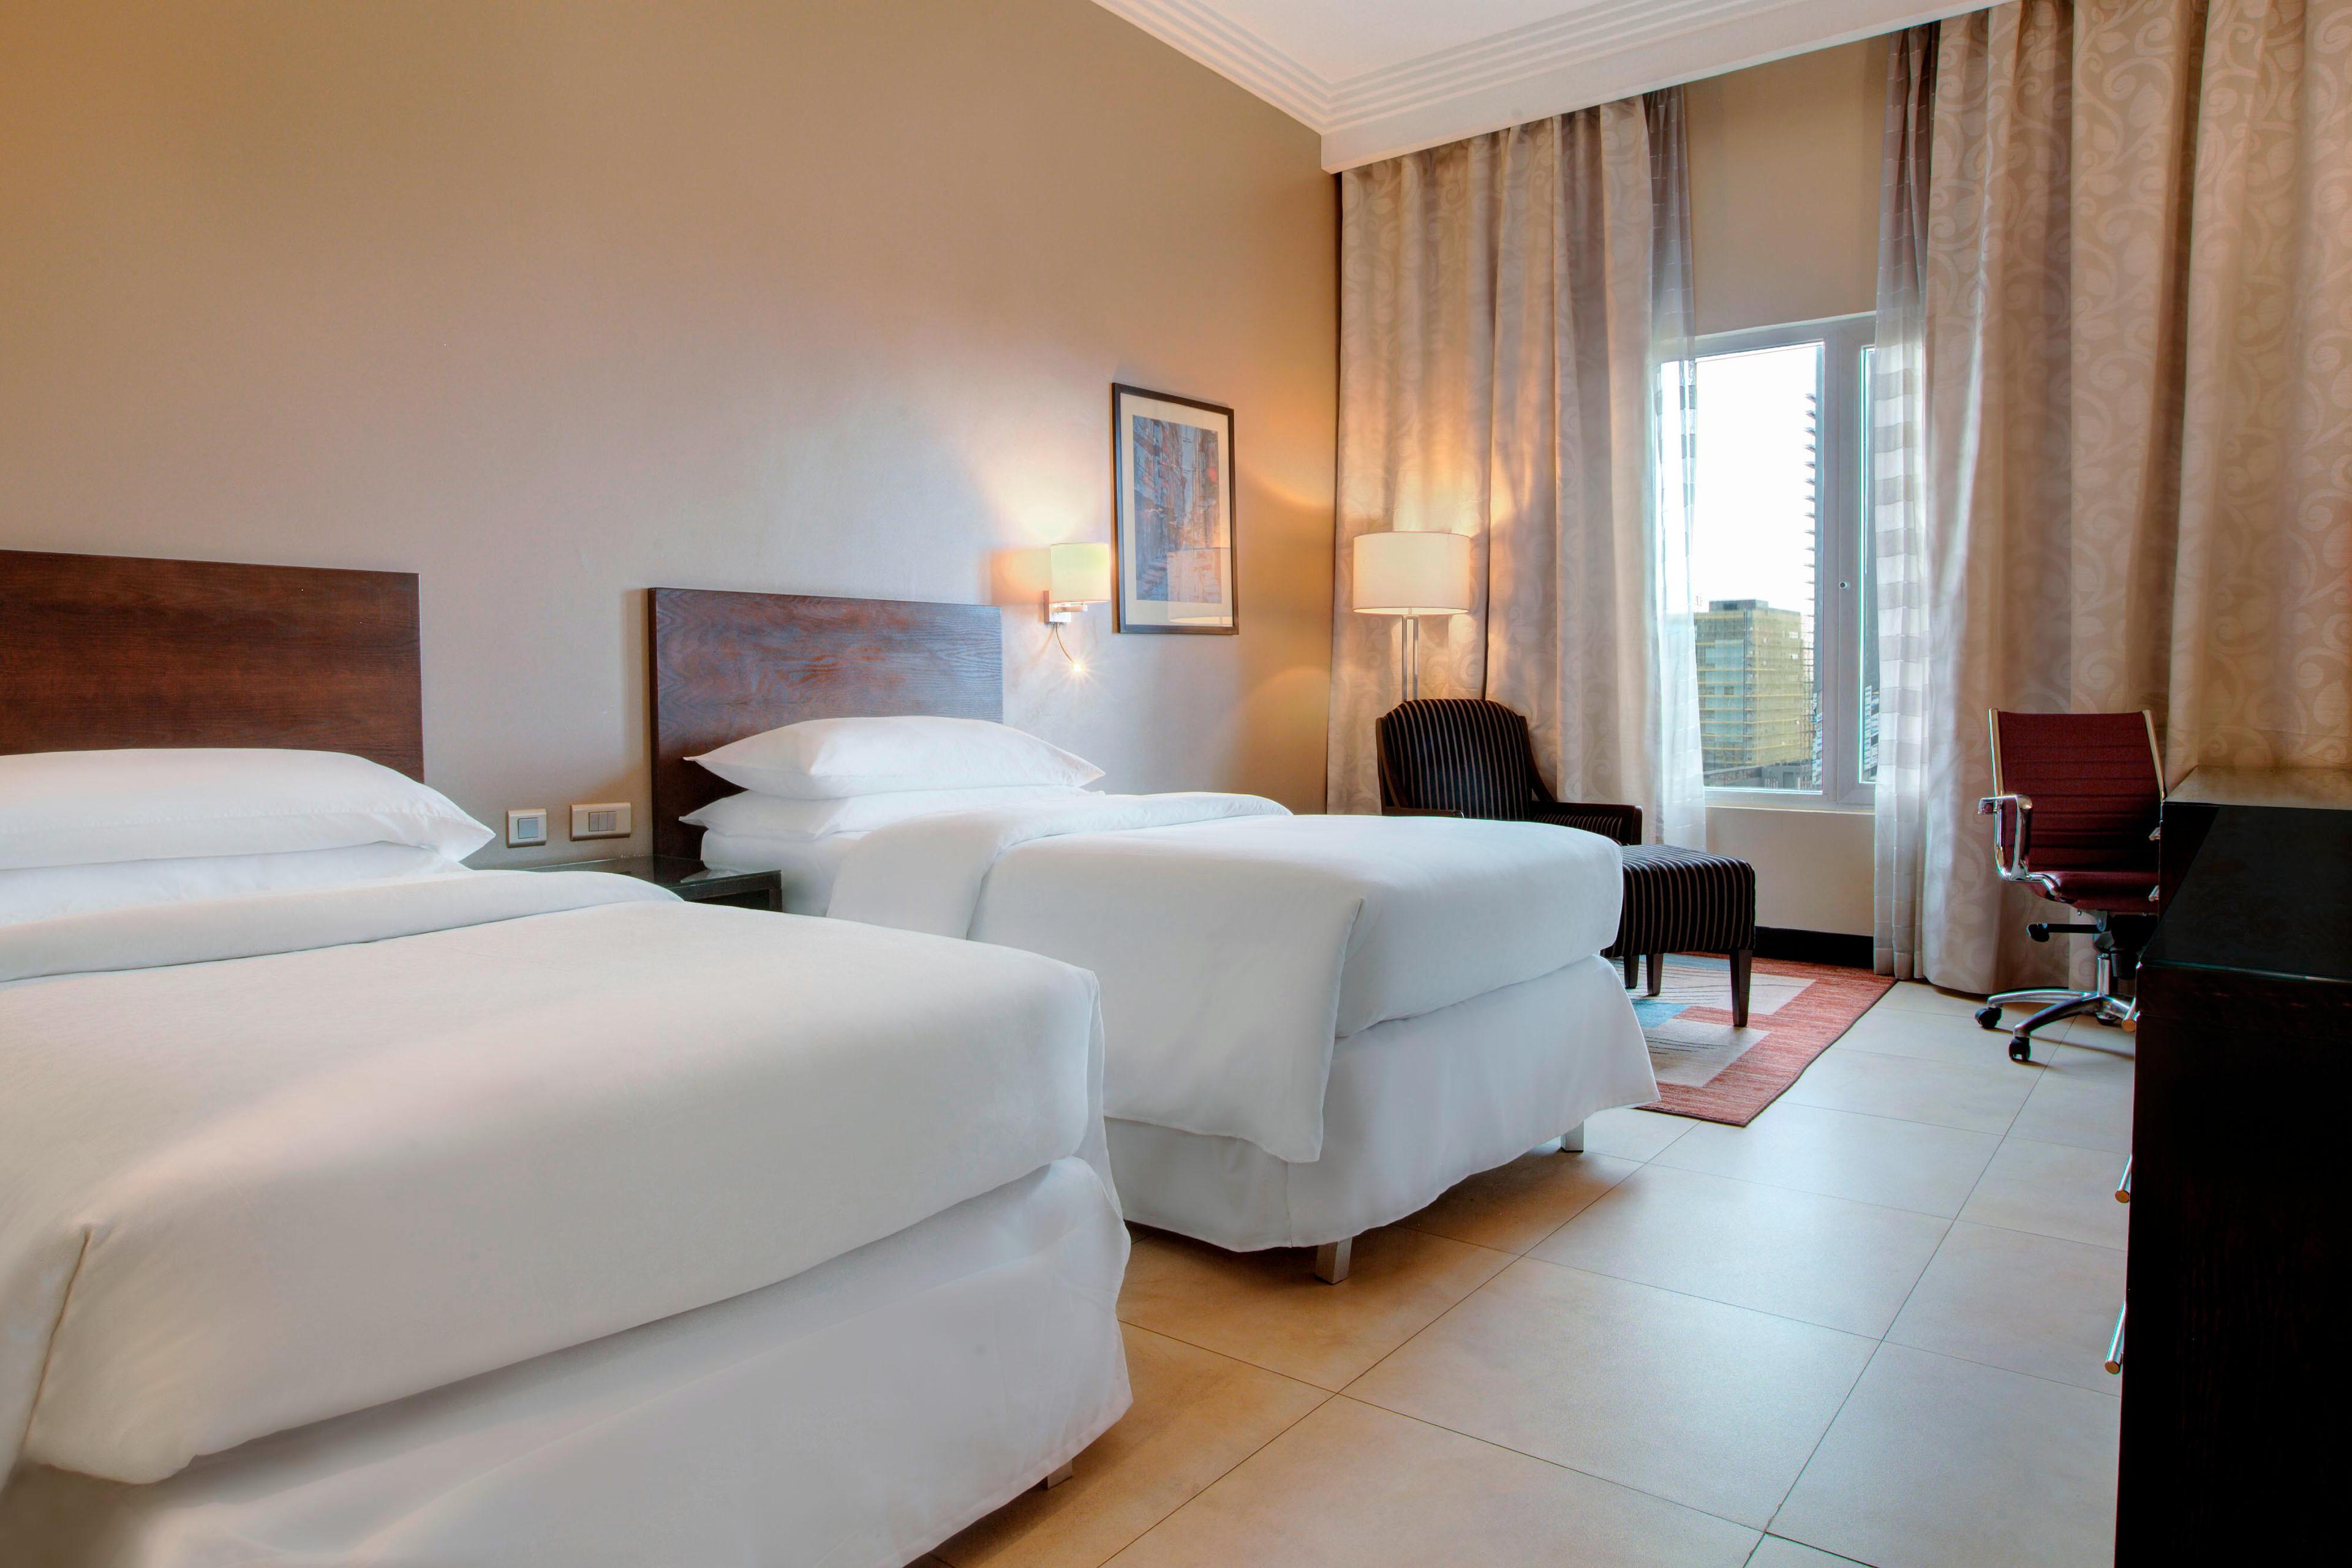 Enjoy a good night sleep in our Traditional room and enjoy the space an access connecting rooms provide.